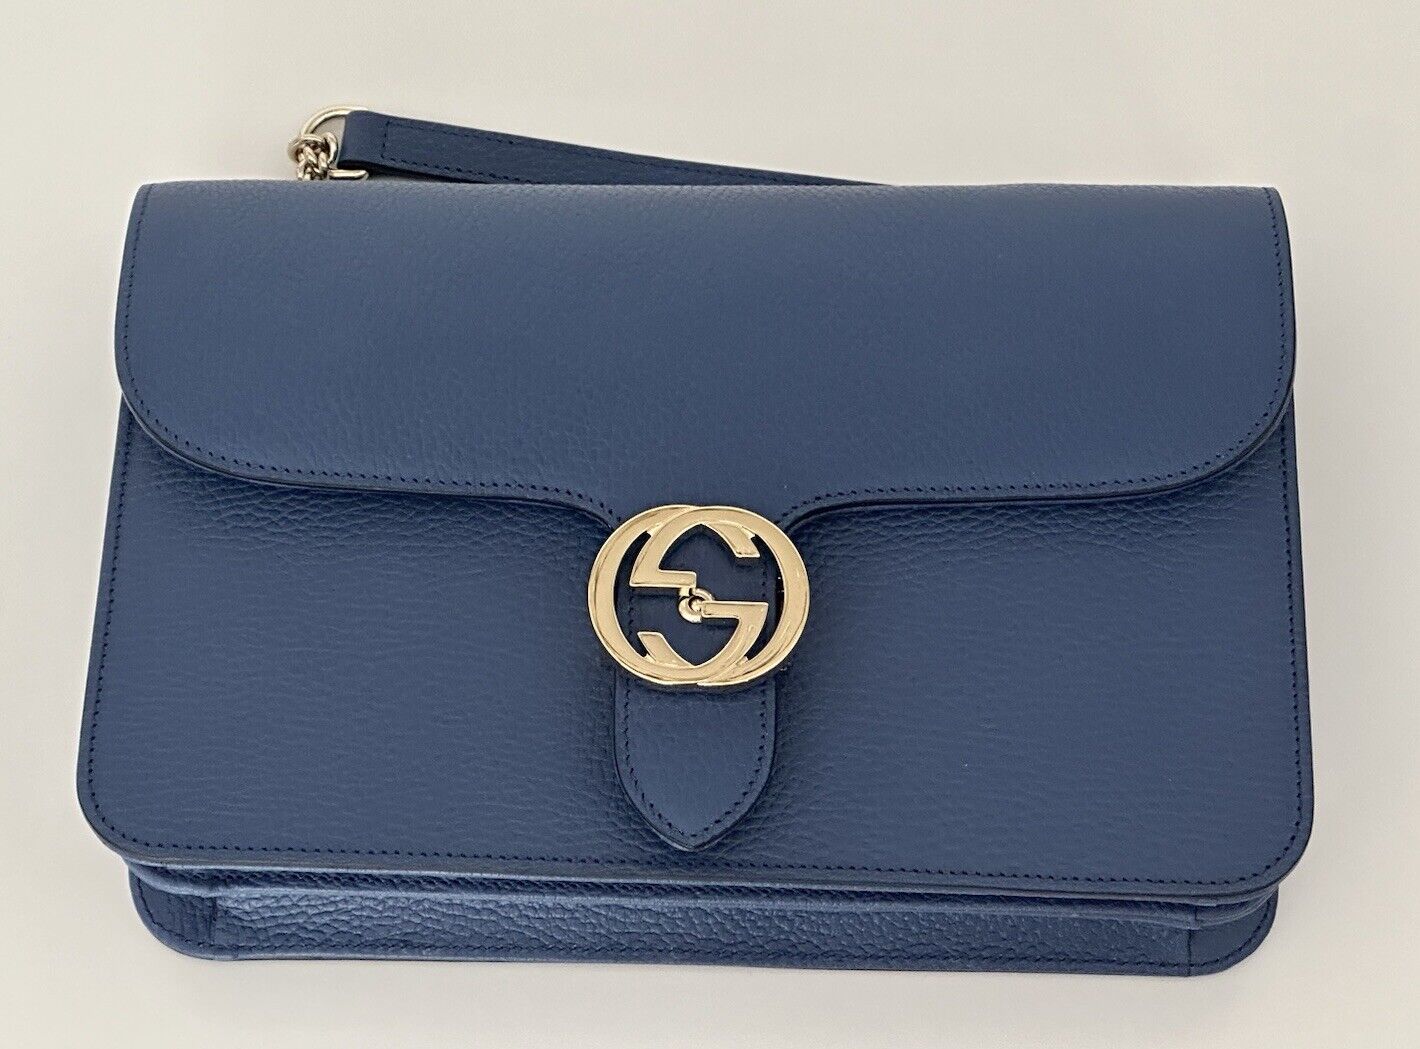 New Gucci Leather Shoulder Handbag Blue Made in Italy 387606